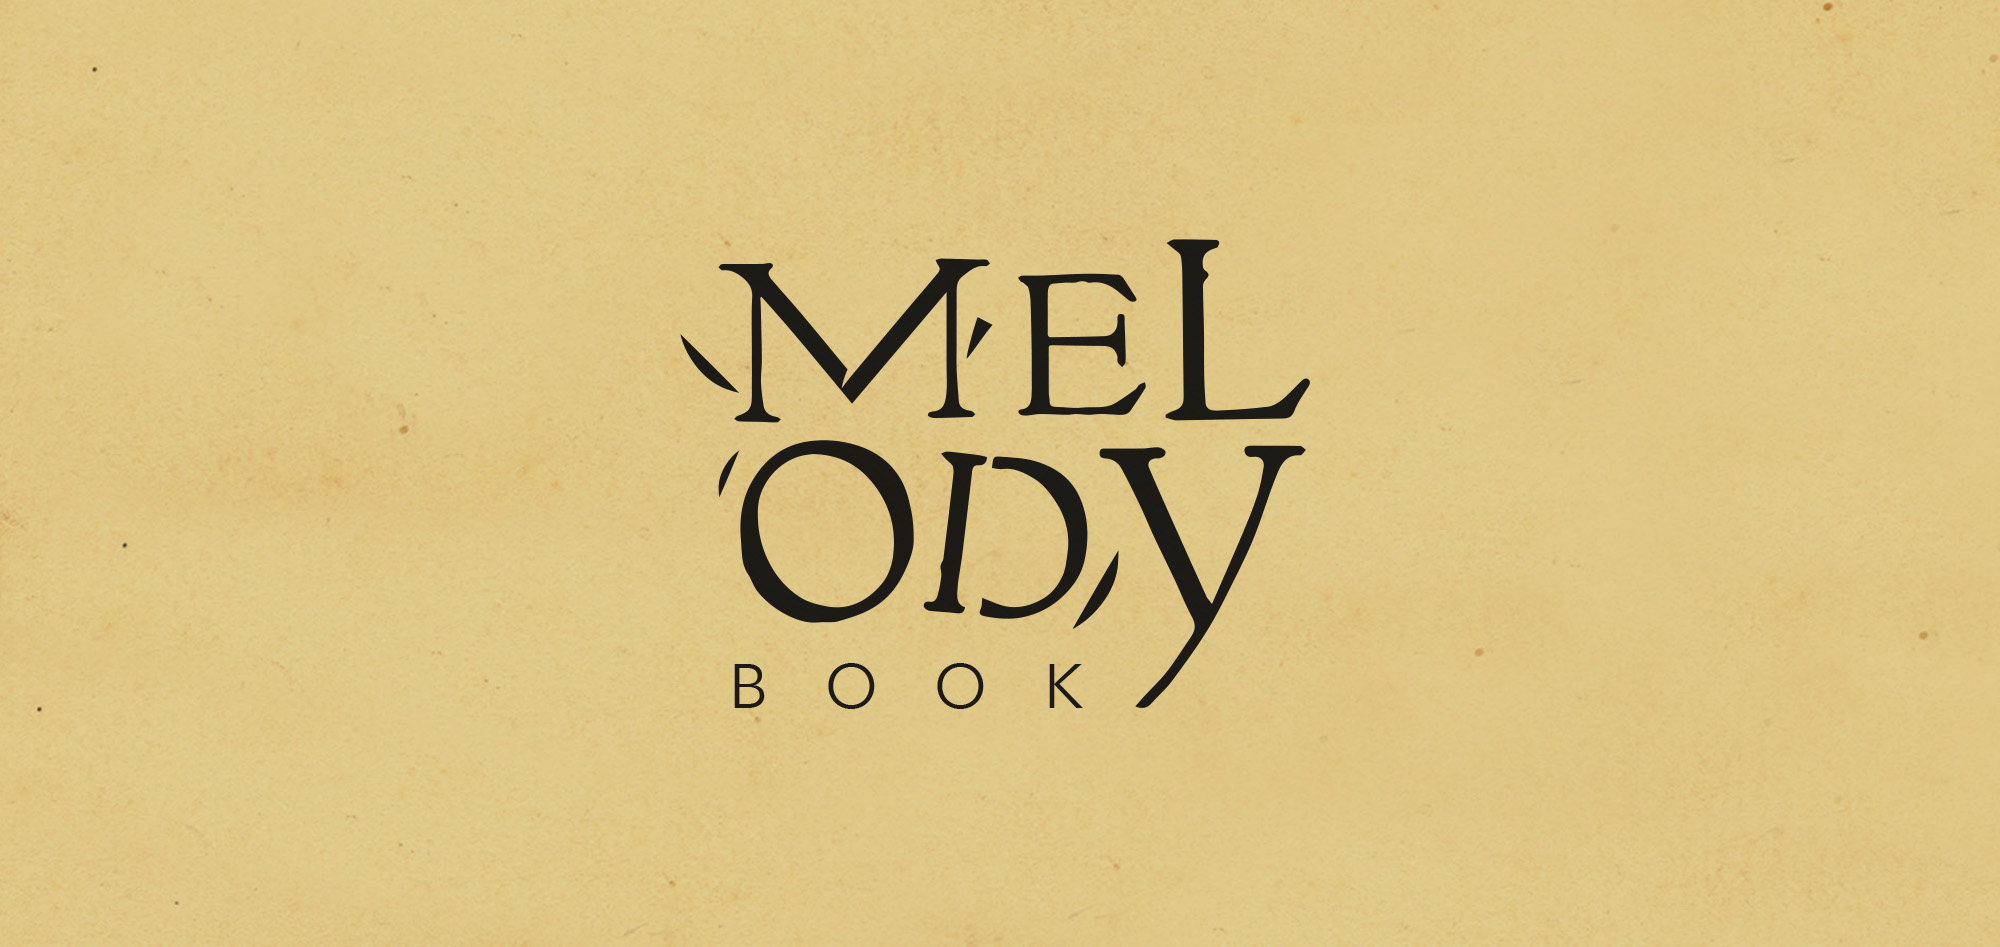 MELODY BOOK